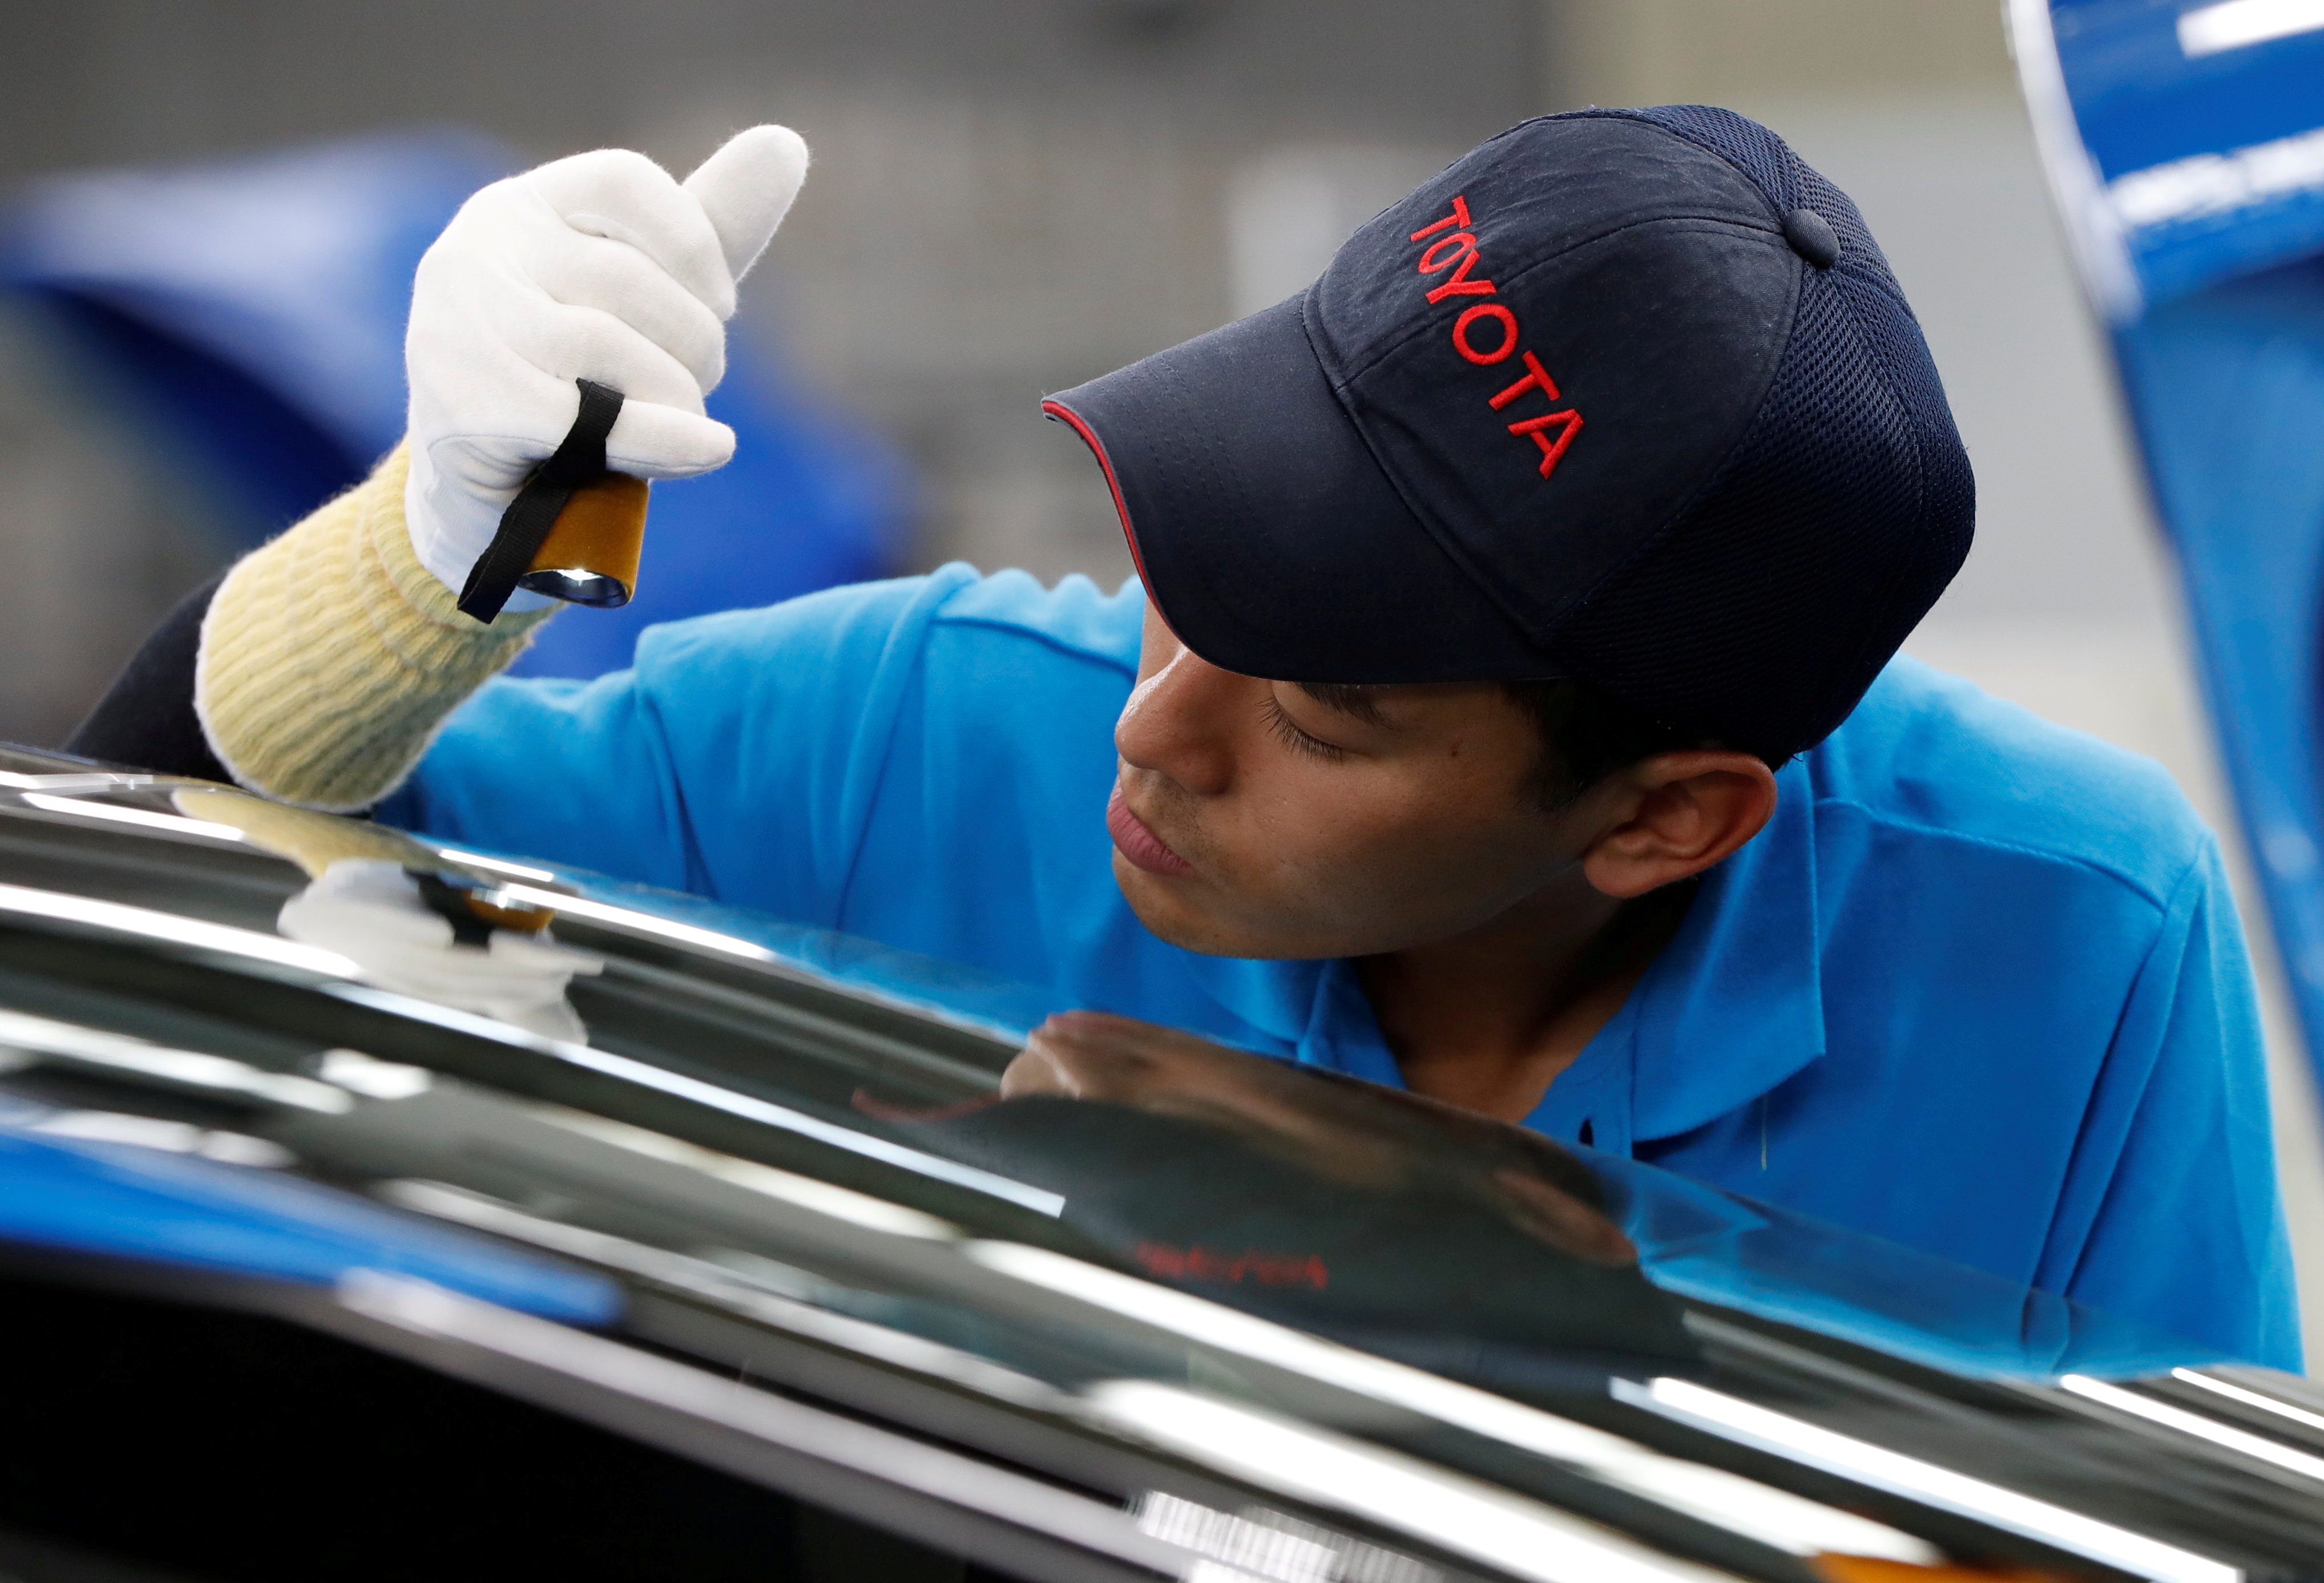 An employee of Toyota Motor Corp. works on the assembly line of Mirai fuel cell vehicle (FCV) at the company's Motomachi plant in Toyota, Aichi prefecture, Japan May 17, 2018. Picture taken May 17, 2018.  REUTERS/Issei Kato